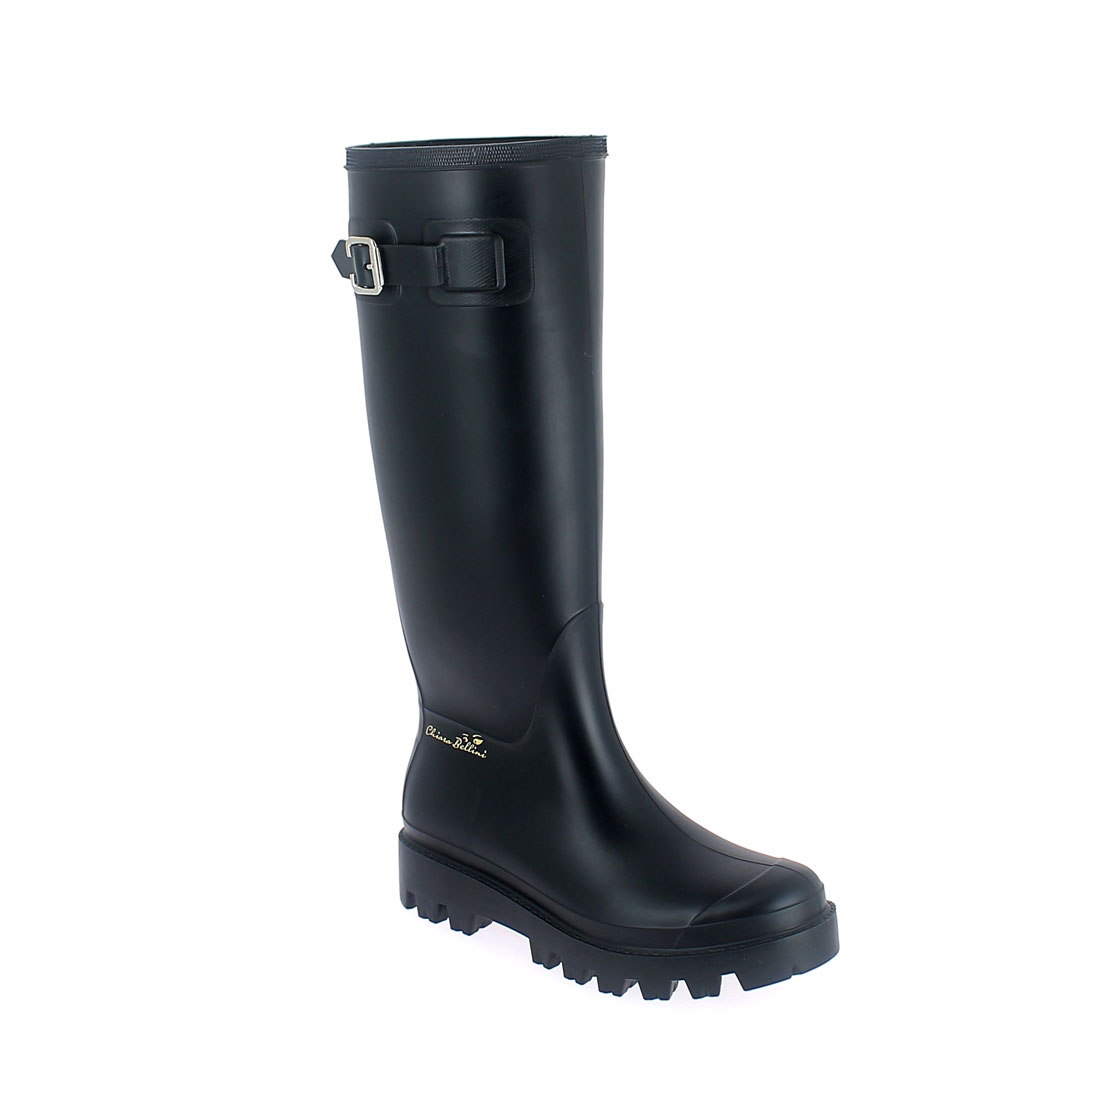 Wellington boot in Black pvc with metal buckle and 3D logo